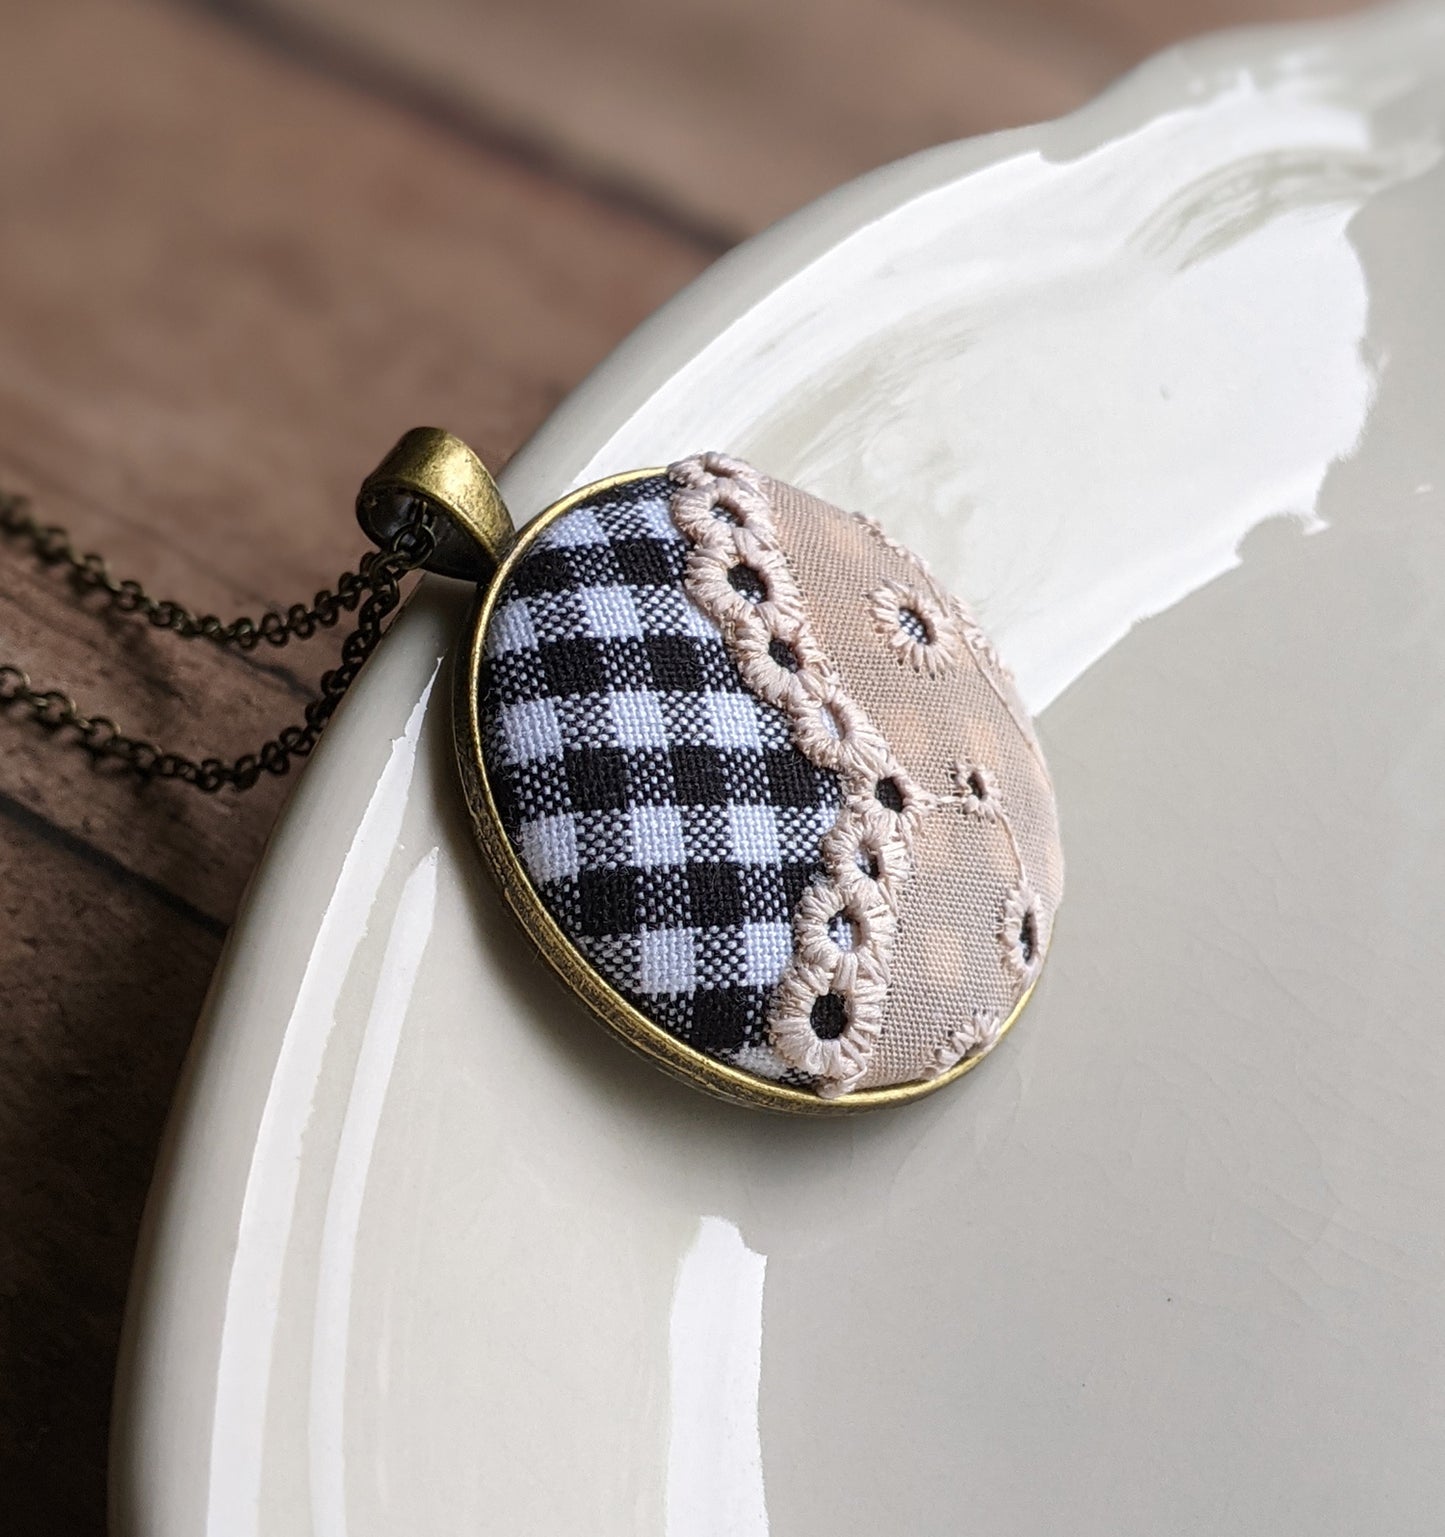 Gingham Plaid Fabric Pendant With Beige Vintage Lace, Black and White